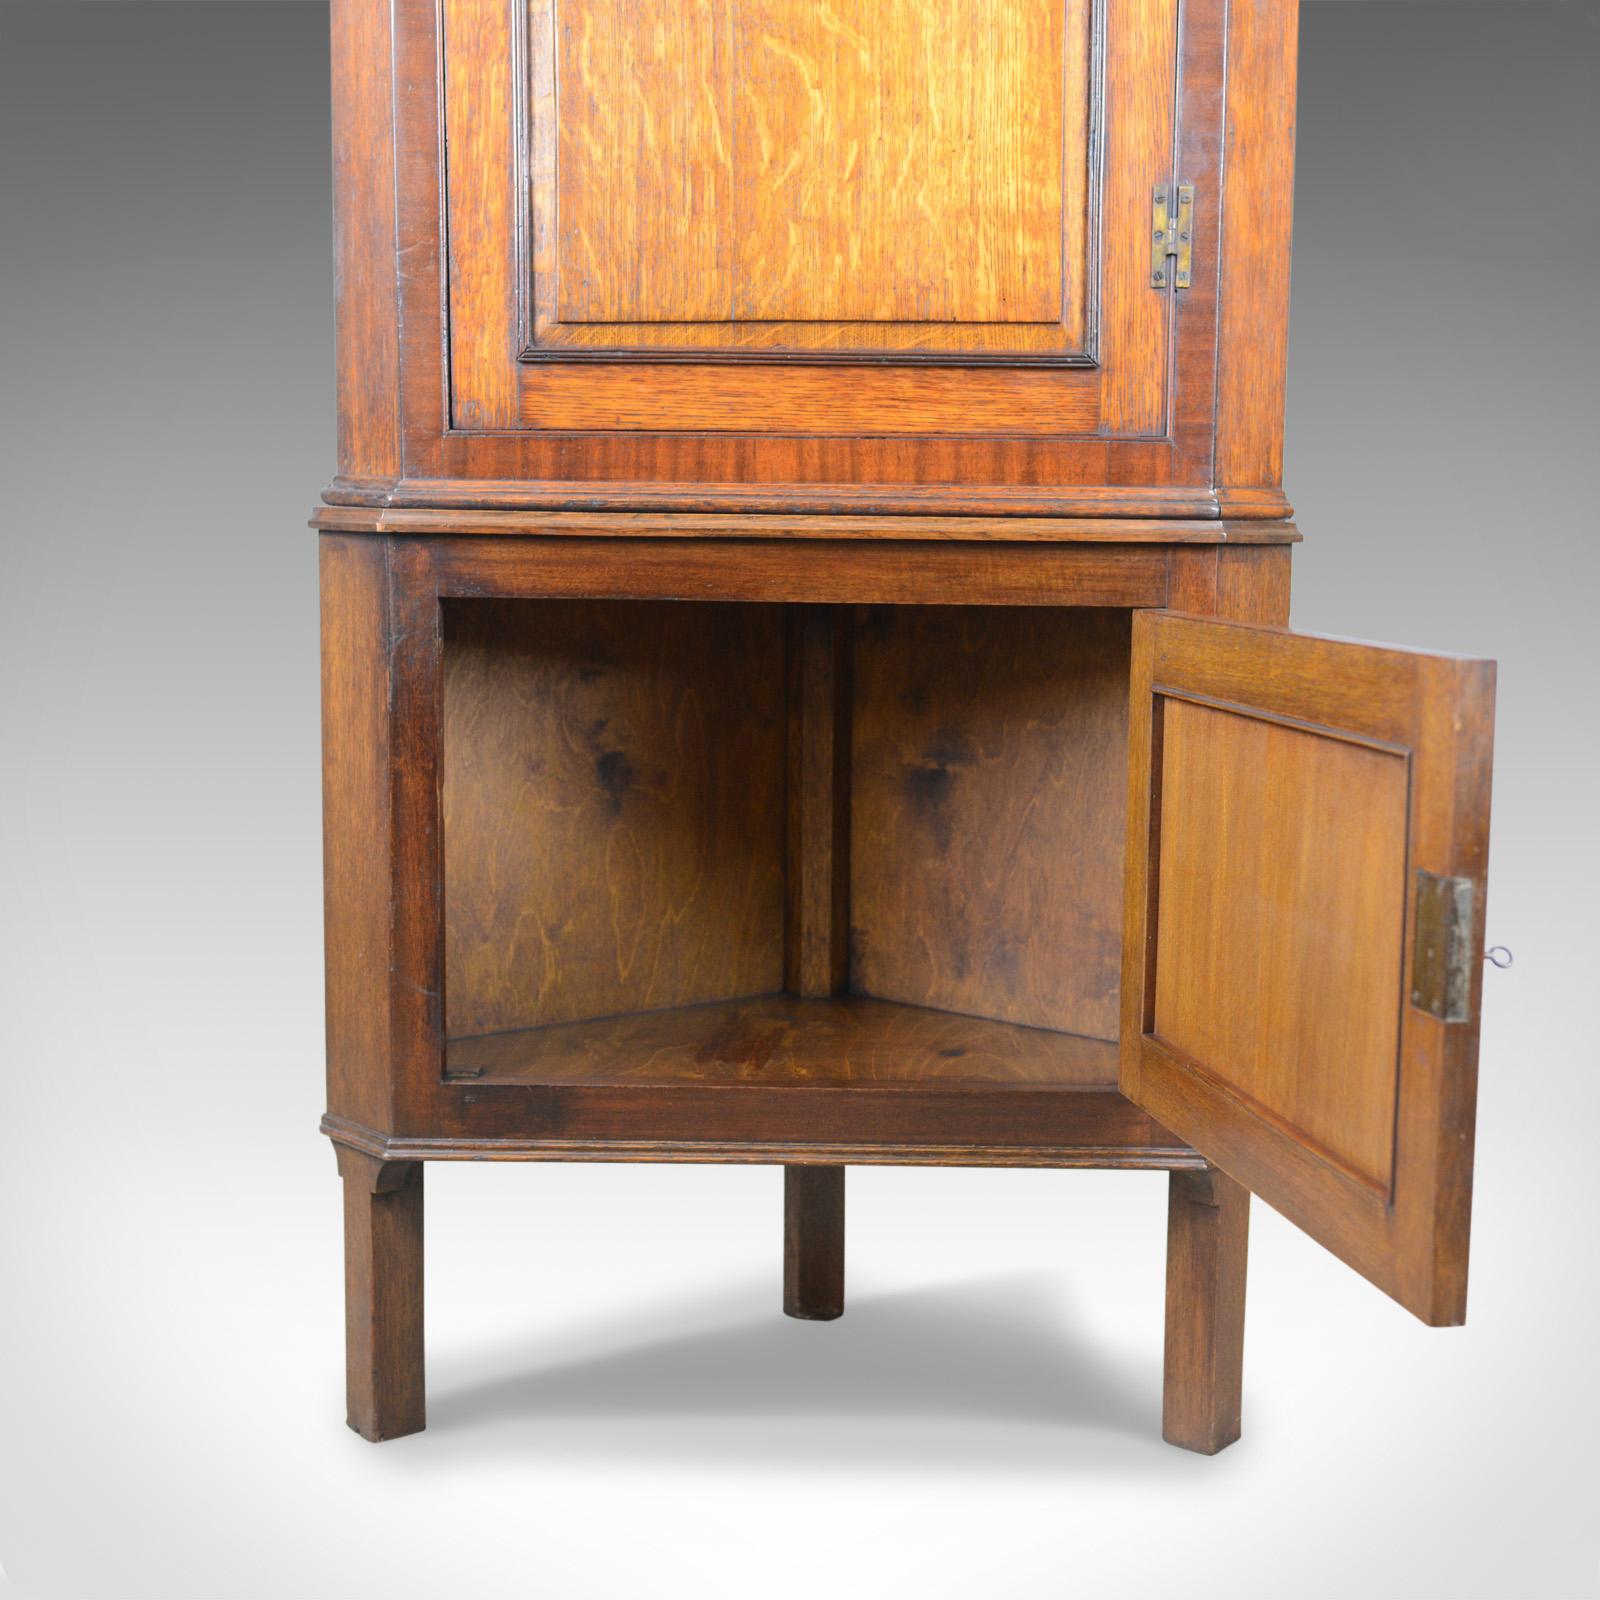 Antique Corner Cabinet on Stand, George III, Oak, Mahogany, circa 1770 and Later (Eichenholz)